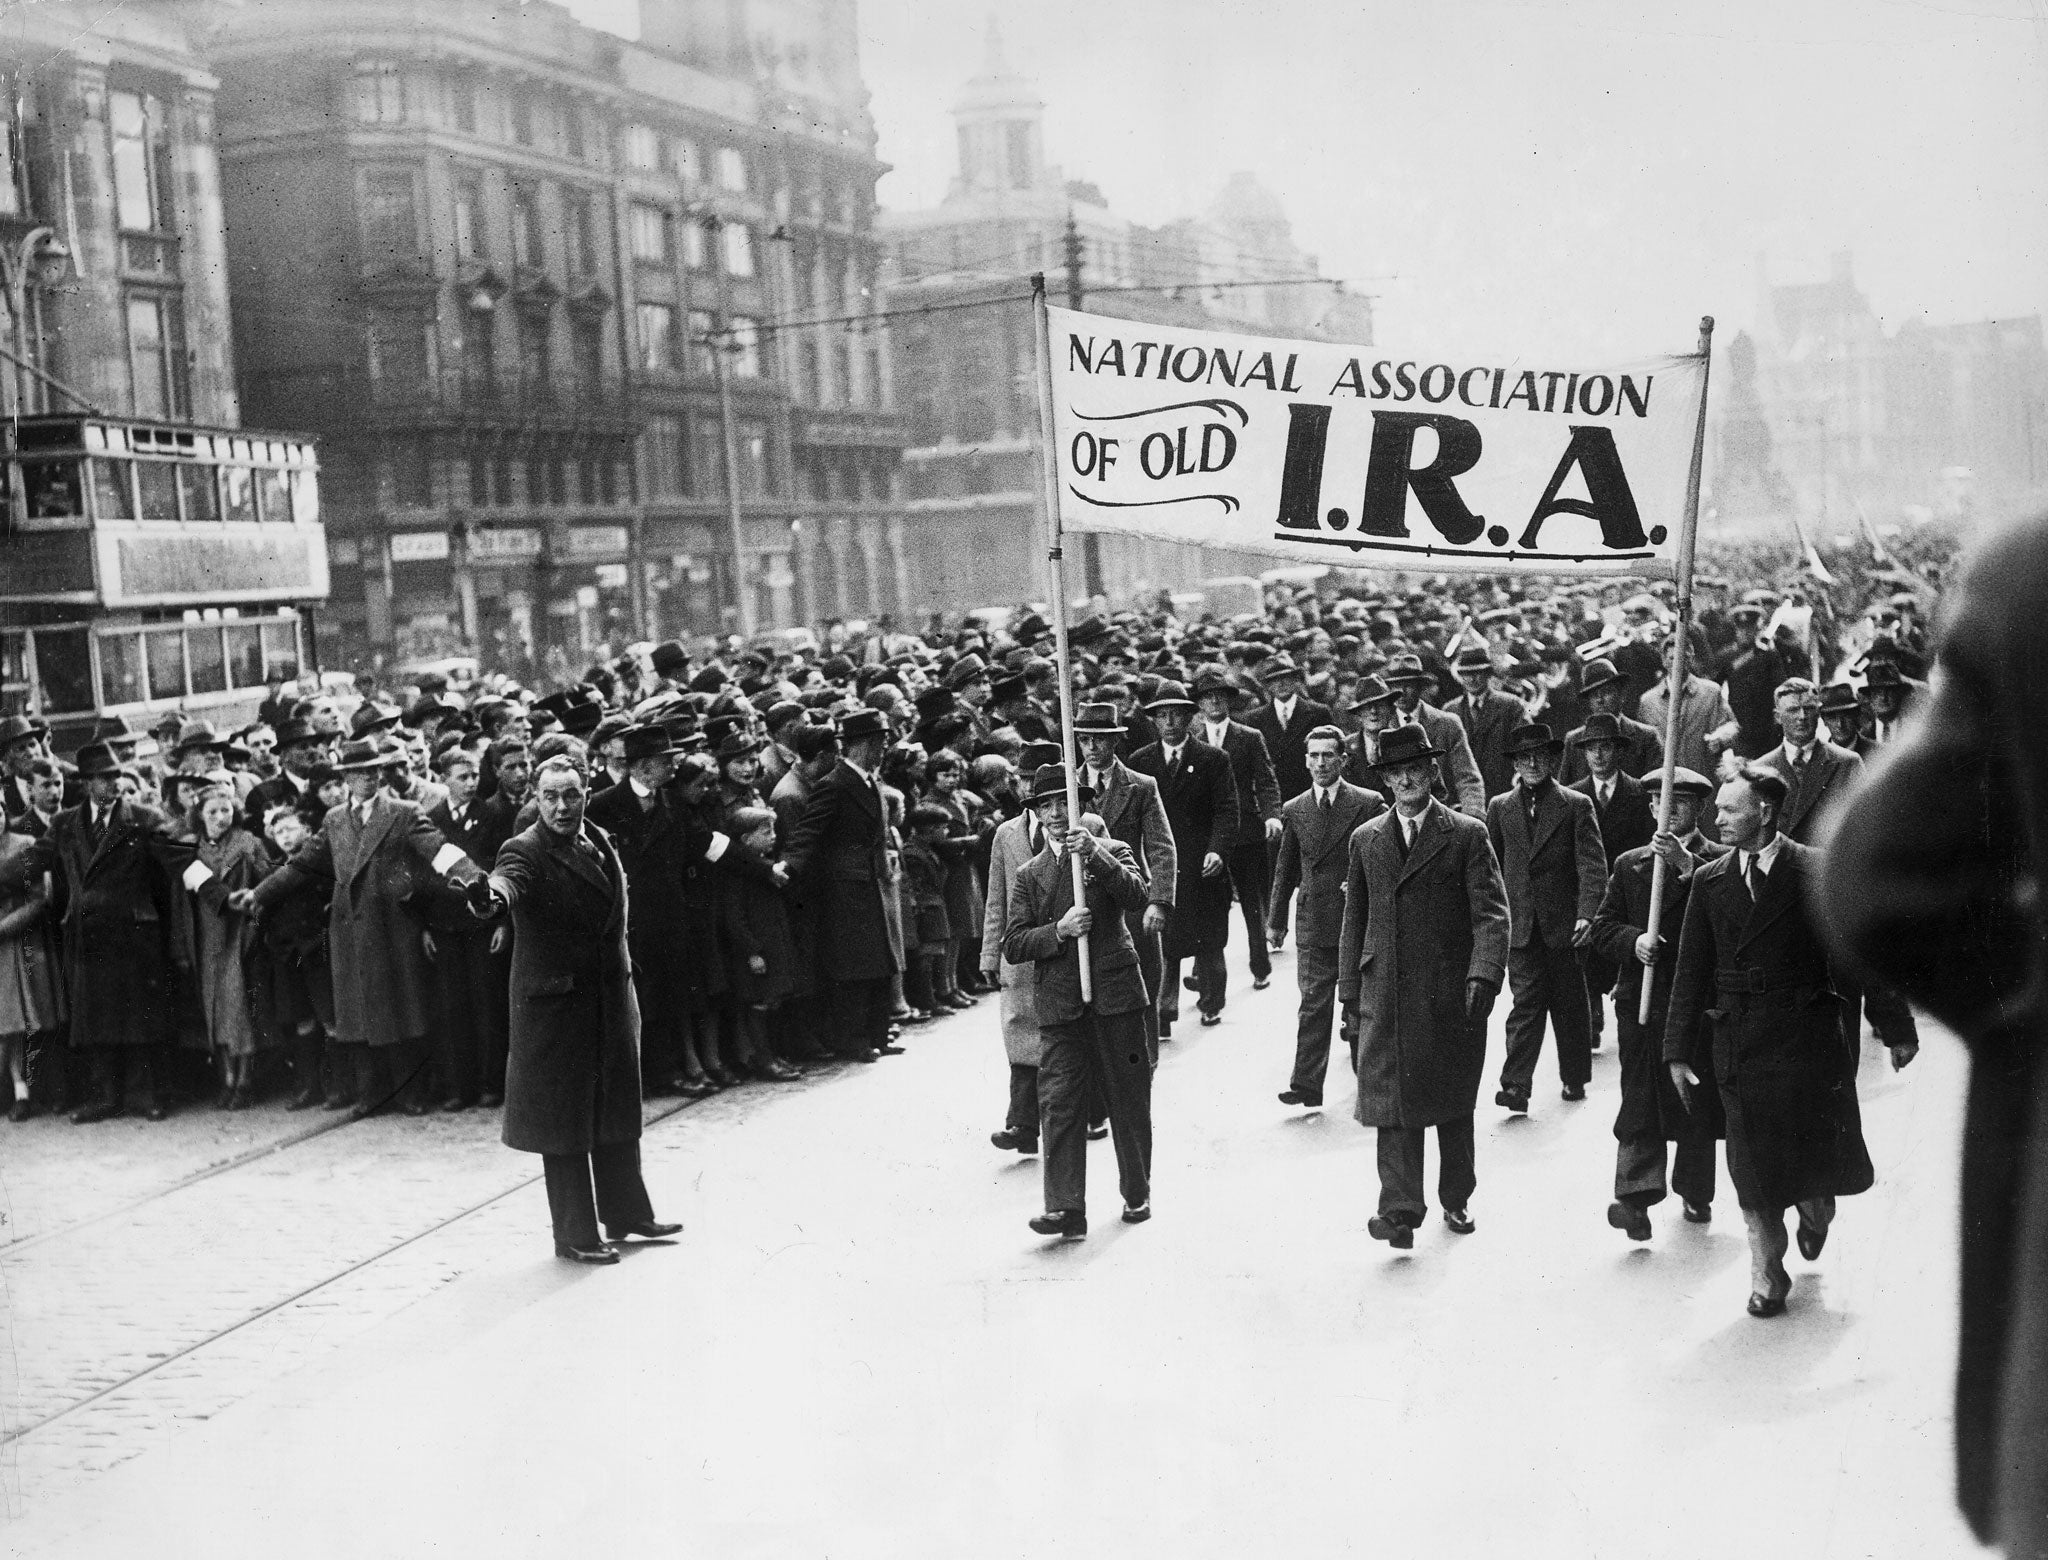 10th April 1939: Crowds march through the streets of Dublin to commerate the Easter Rising, the armed uprising of Irish nationalists against British rule in Ireland.